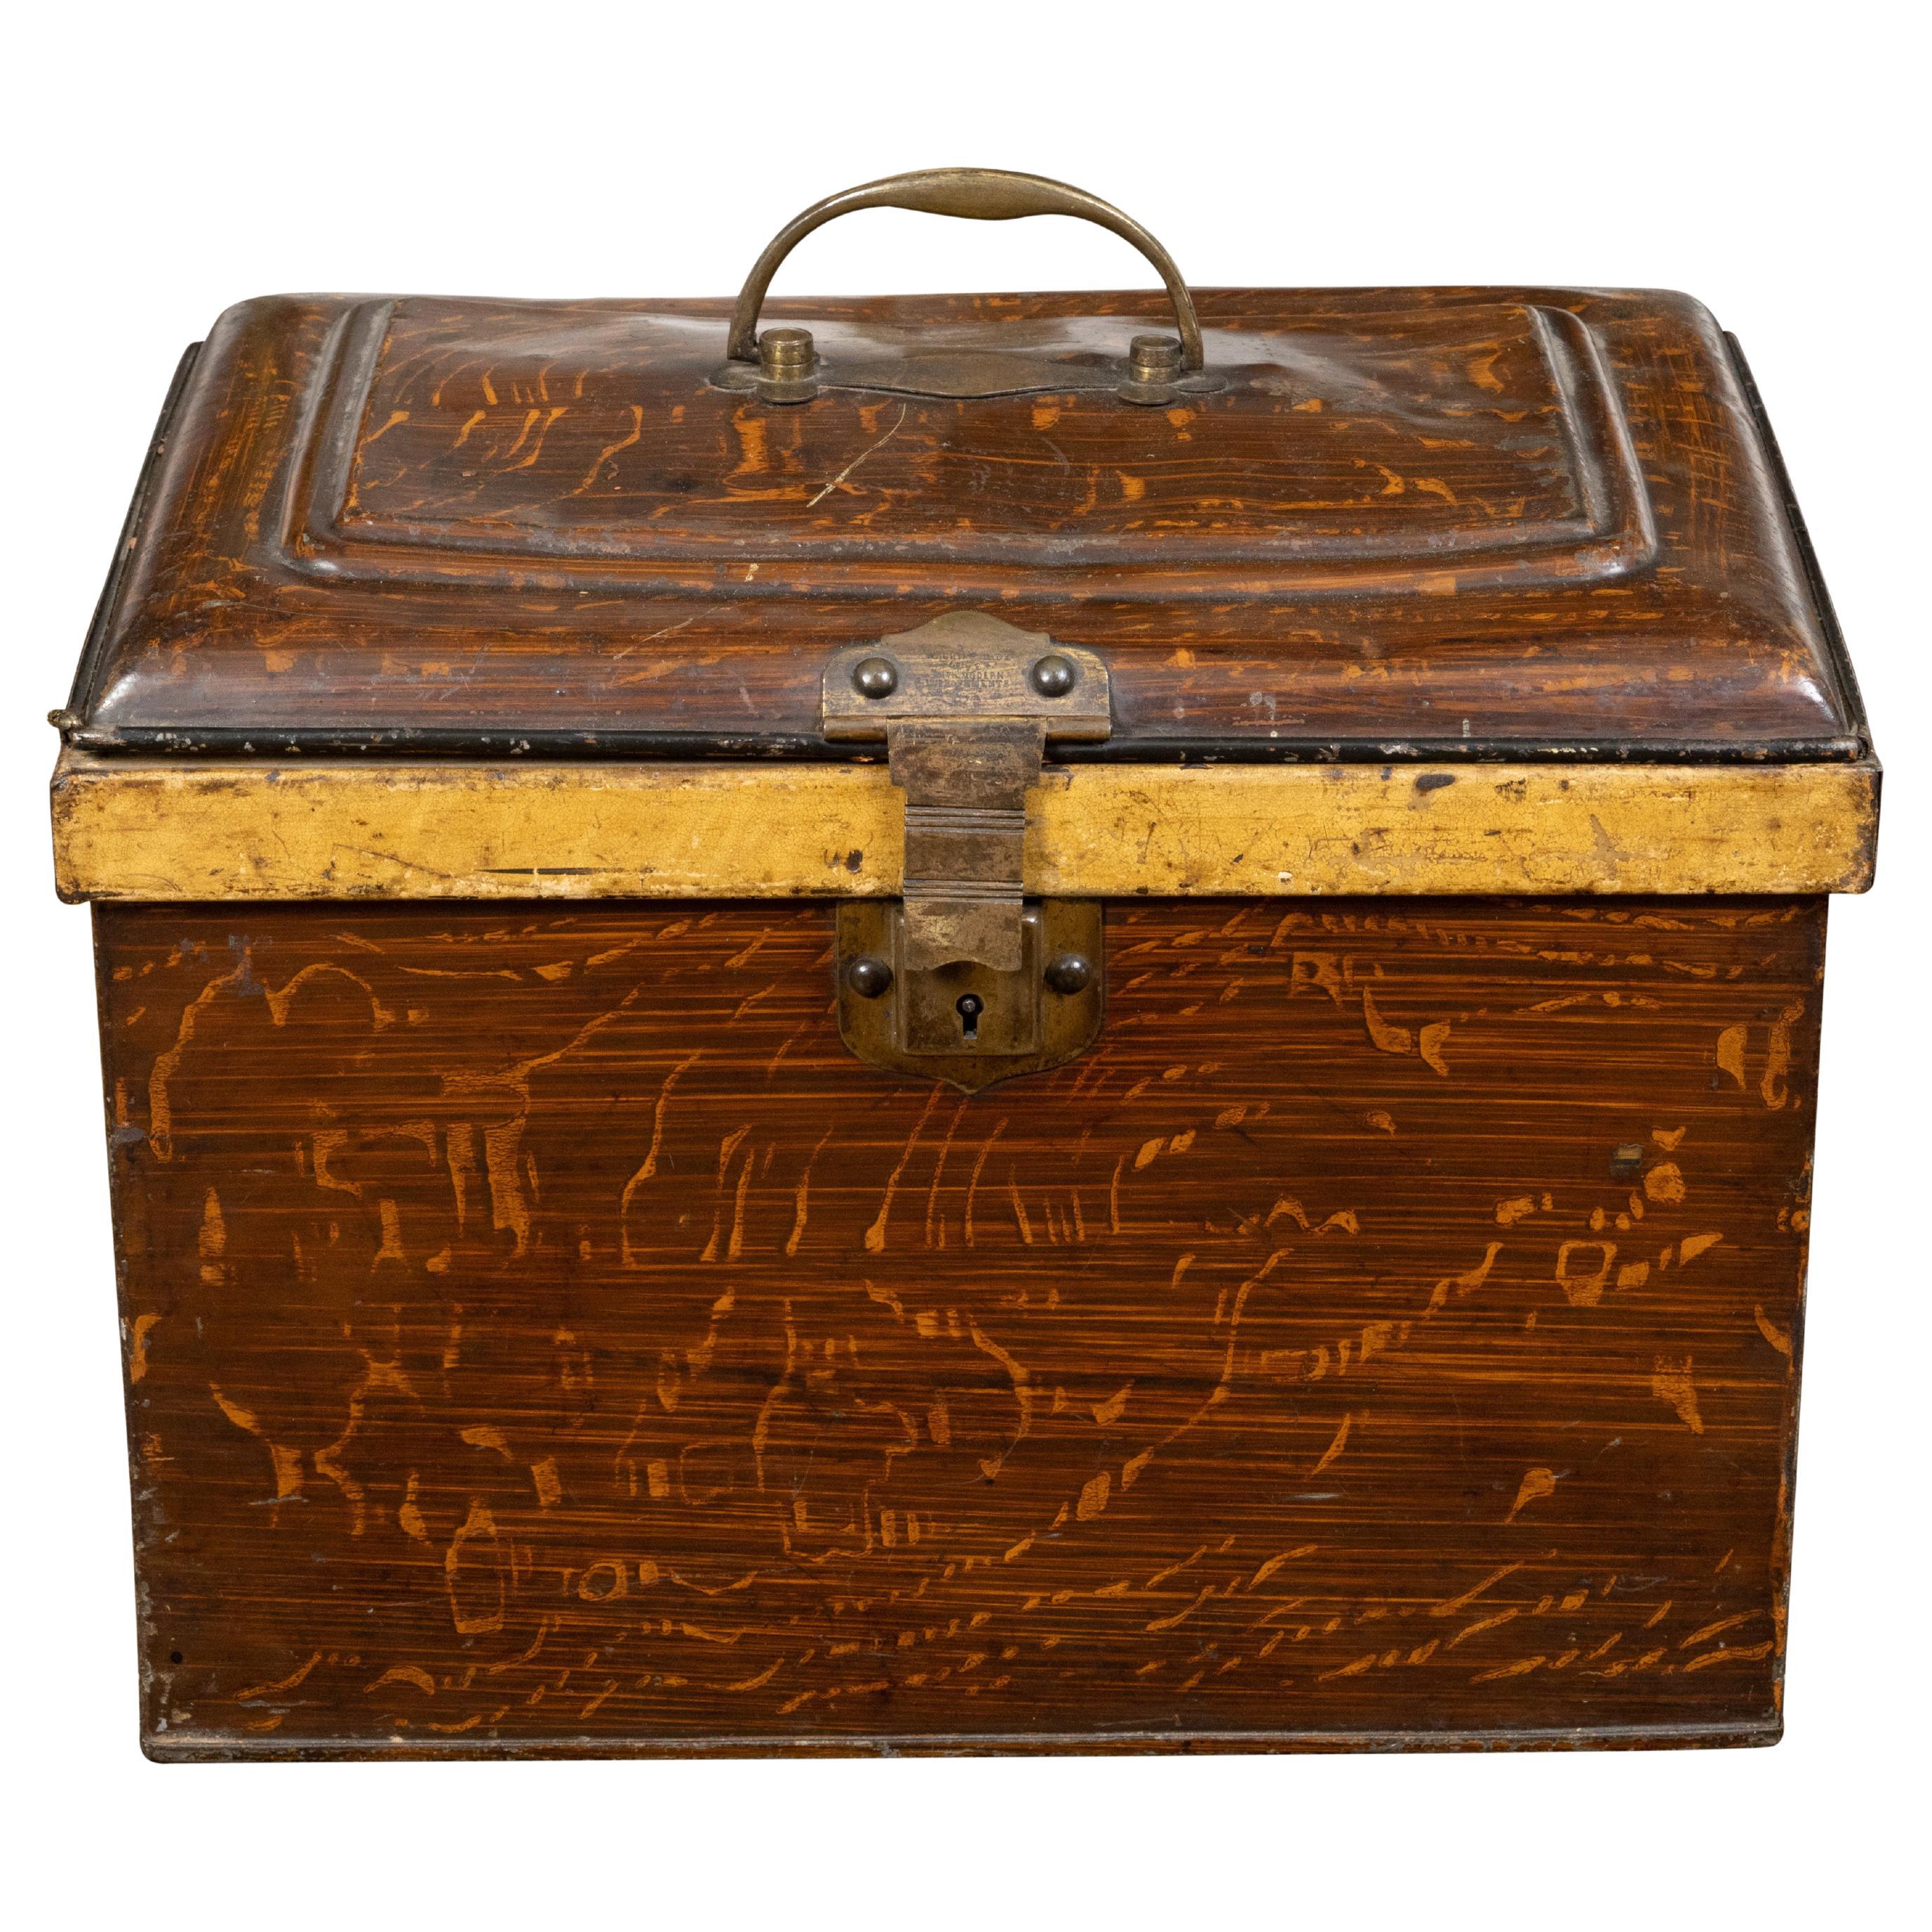 French 1890s Rustic Painted Tôle Box with Wood Grain Finish and Goldenrod Accent